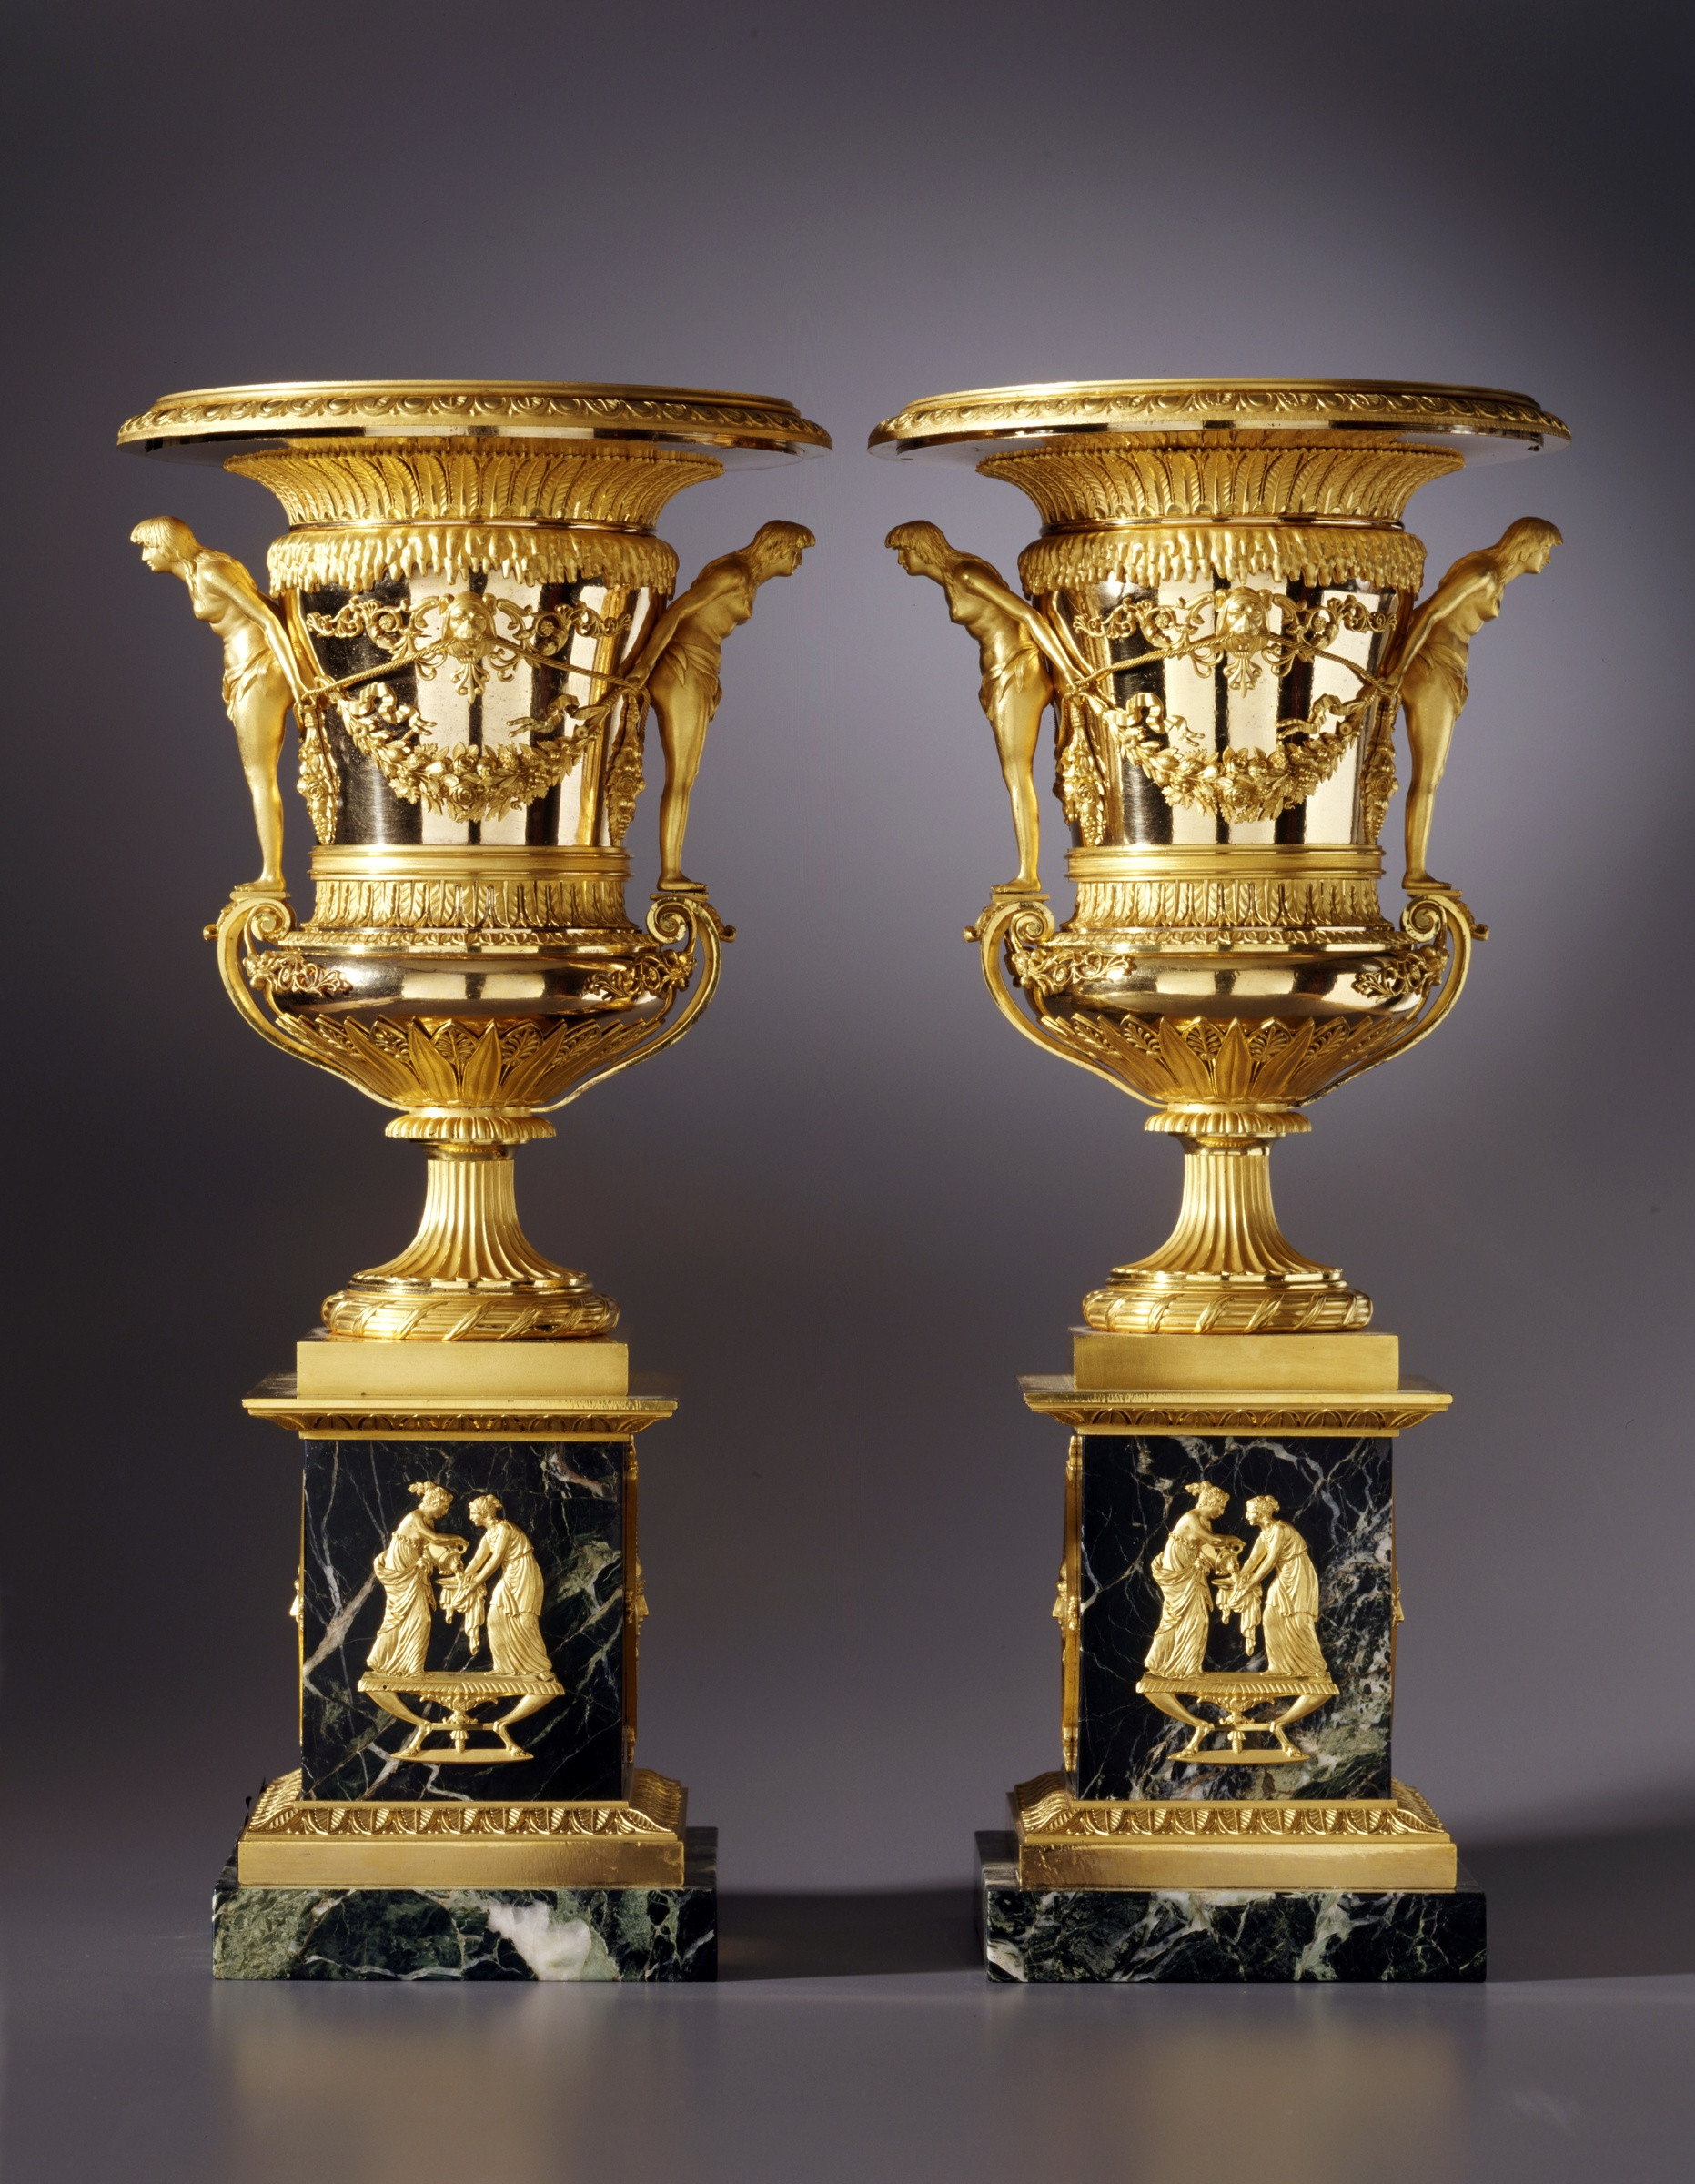 30 Fabulous Black Vases for Sale 2023 free download black vases for sale of friedrich bergenfeldt attributed to a pair of large sized st throughout a pair of large sized st petersburg empire vases attributed to friedrich bergenfeldt